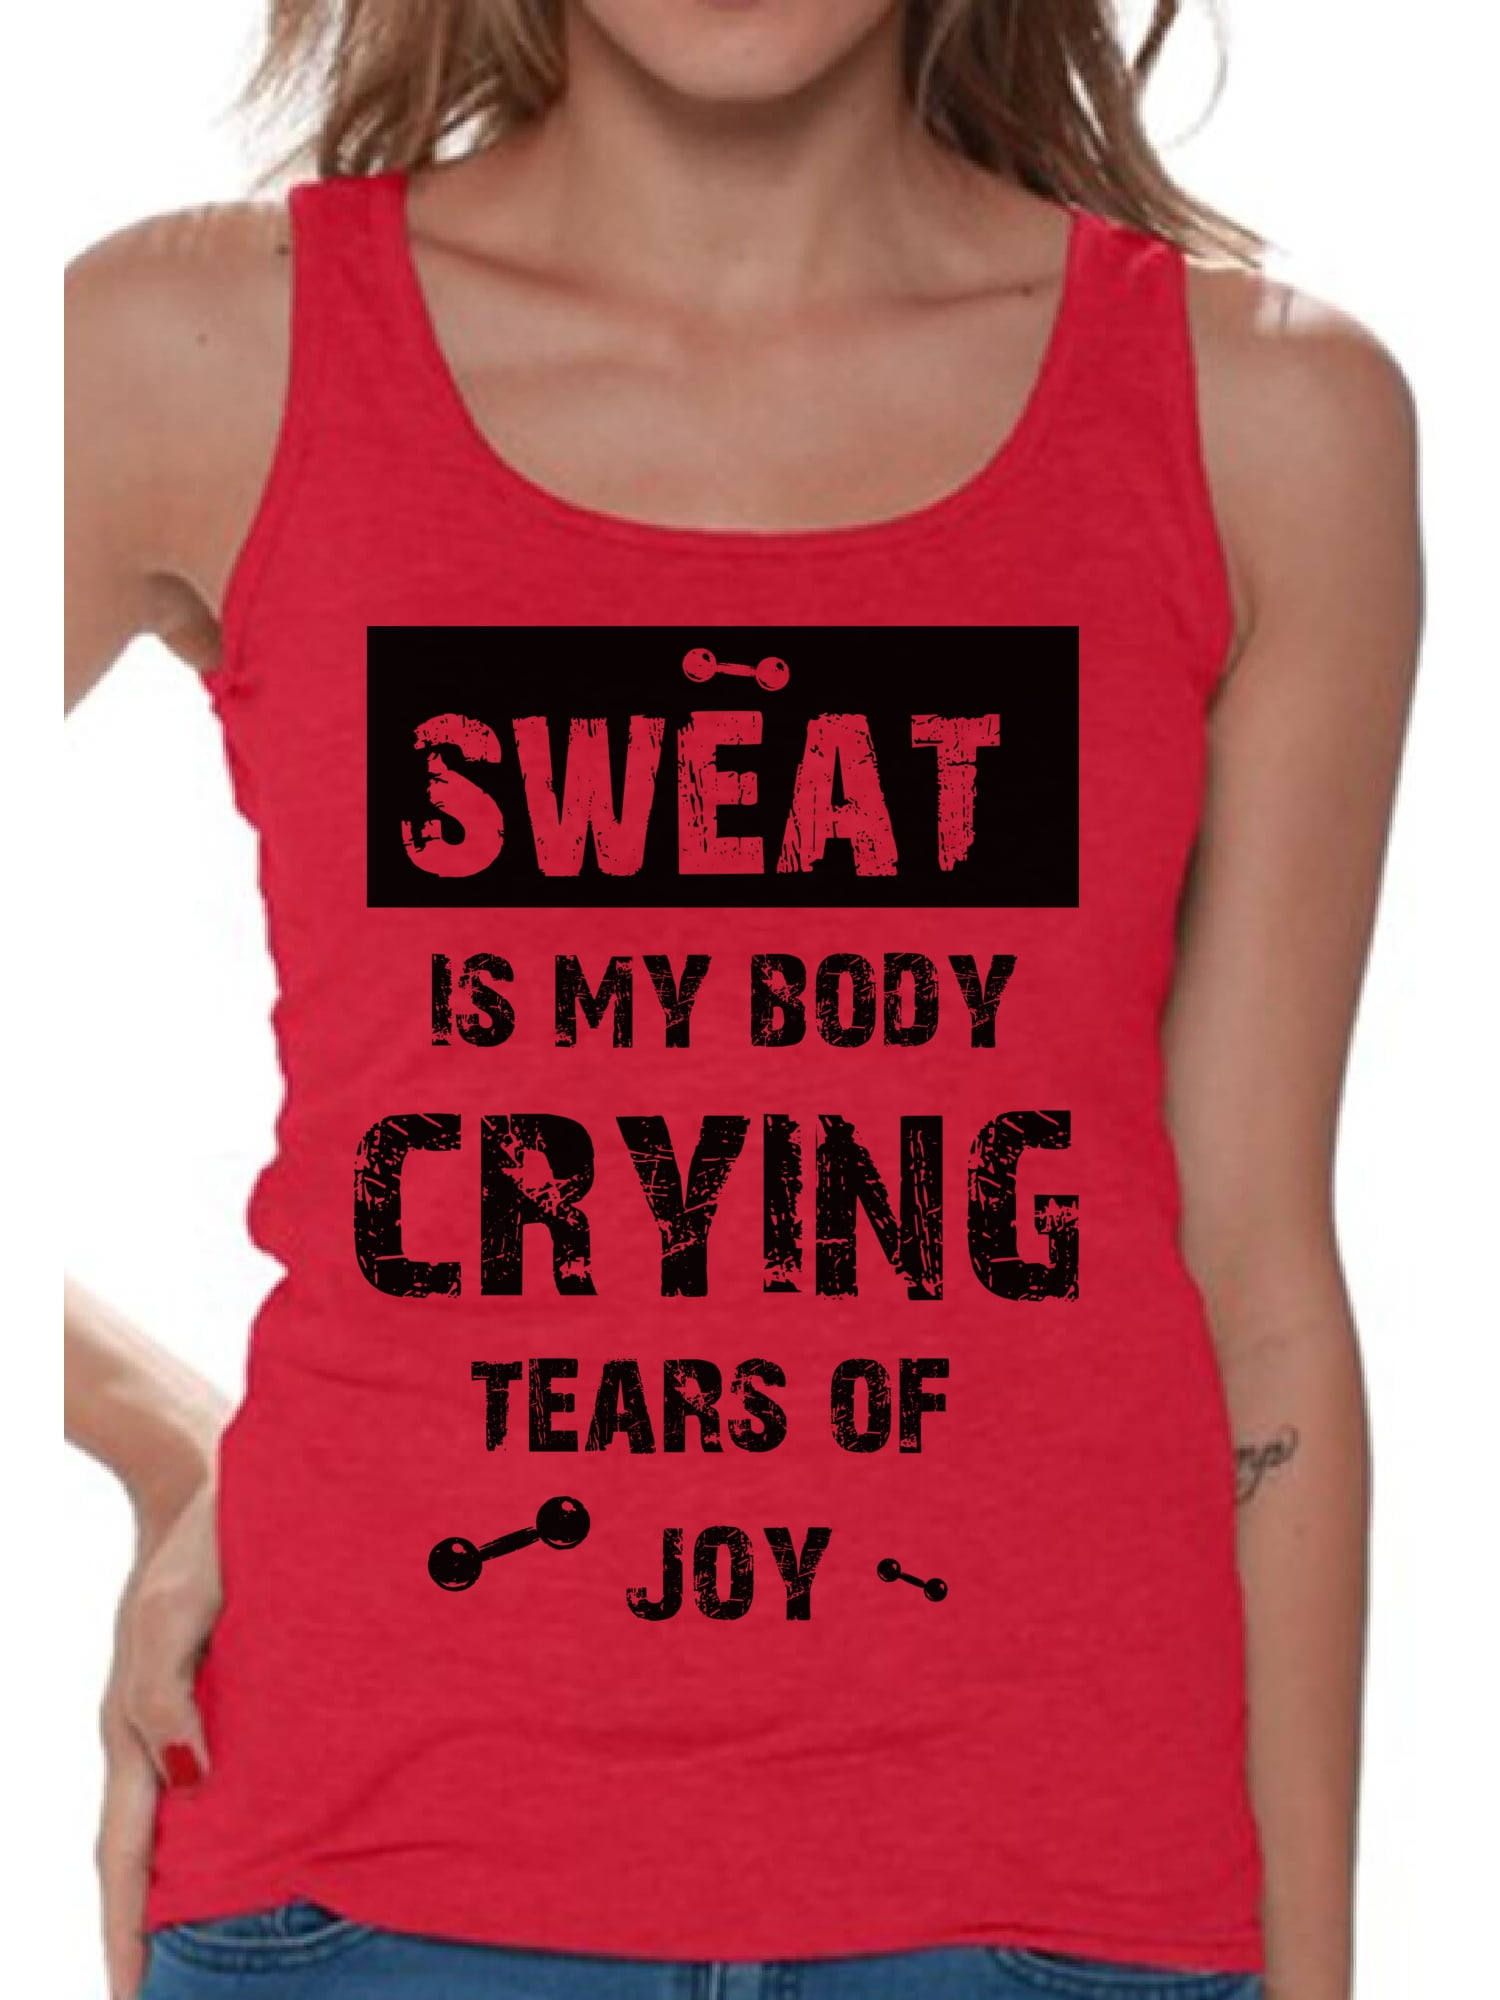 Funny Gym Tanks for Women Sweat is My Body Black Ladies Tank Top Workout  Theme Women's Gym Clothing Ladies Top Bodybuilding Motivation Tee Tops -  